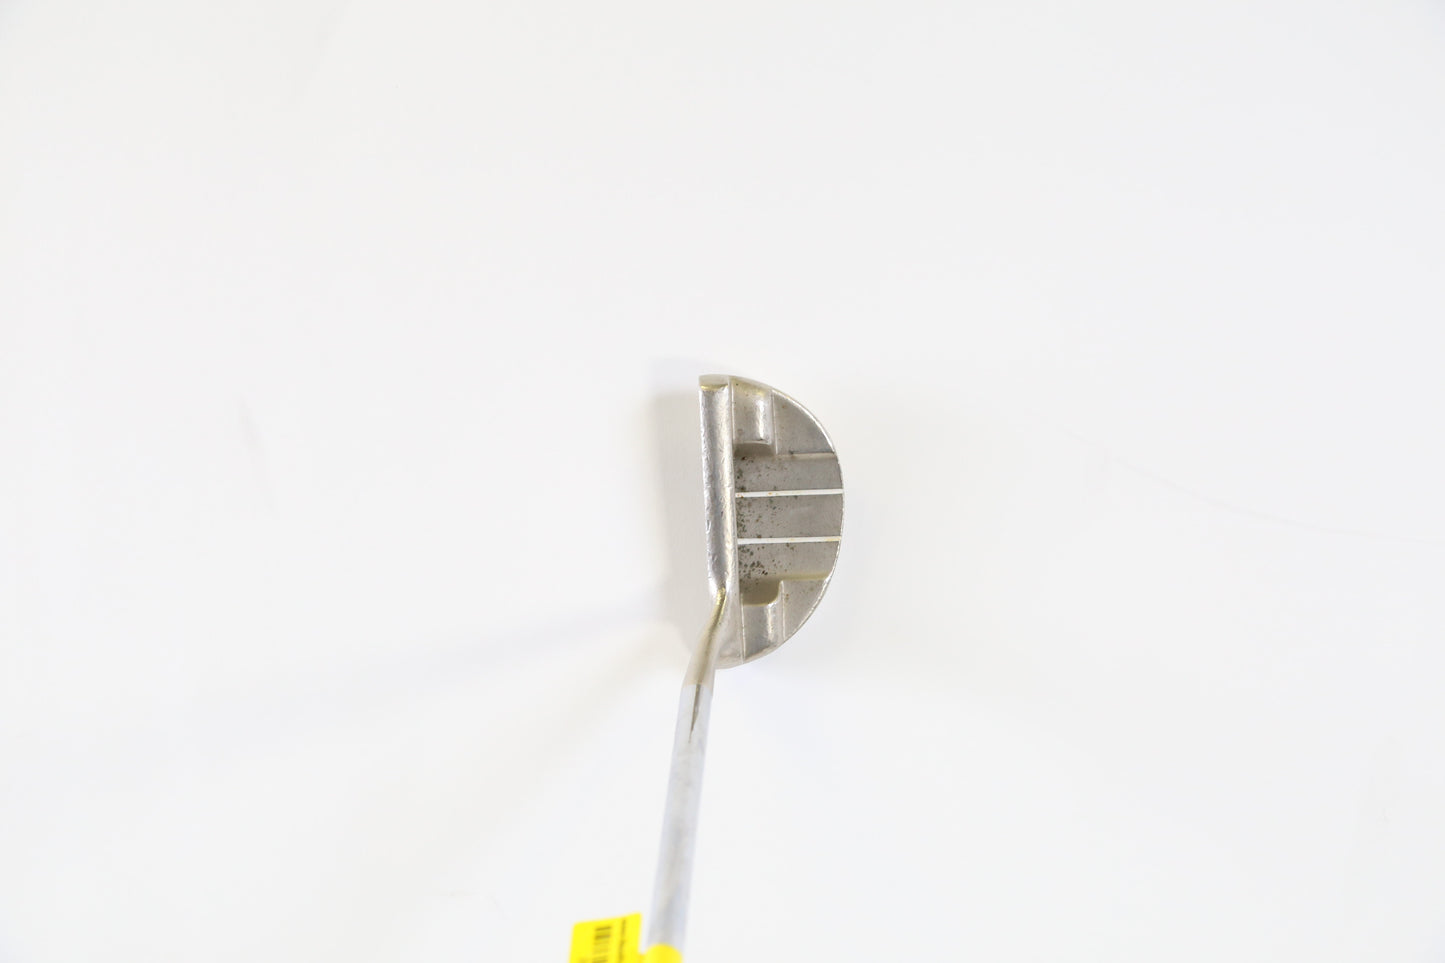 Used Cleveland Classic 3 2009 Putter - Right-Handed - 34 in - Mid-mallet